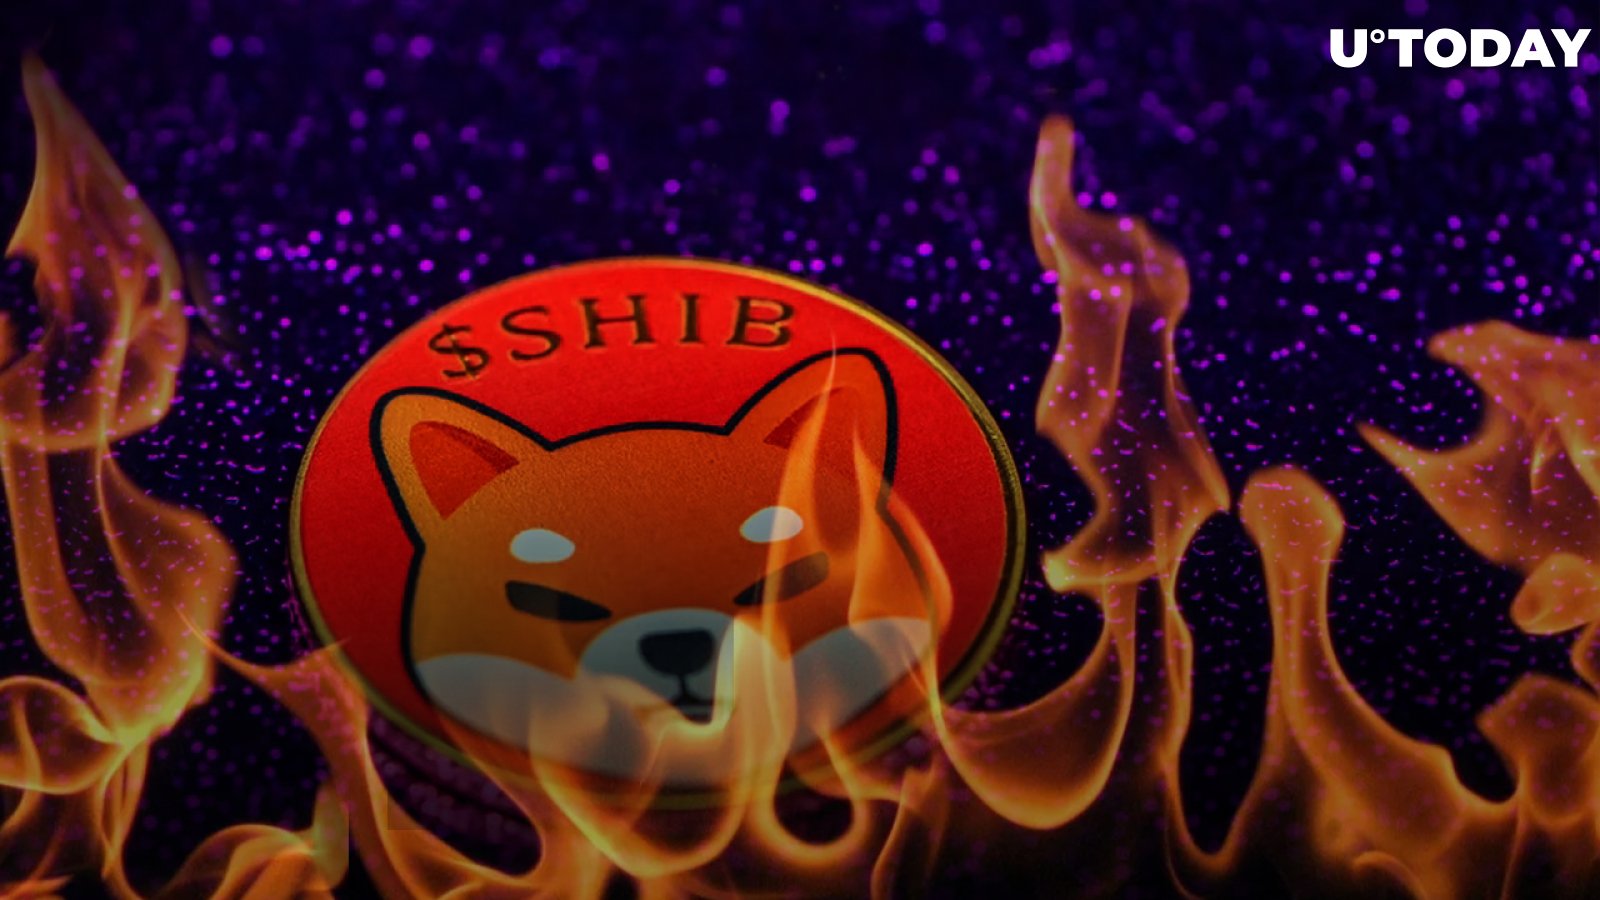 202 Million Shiba Burned as 47 Million SHIB Offered to Lucky Supporter by This Burner